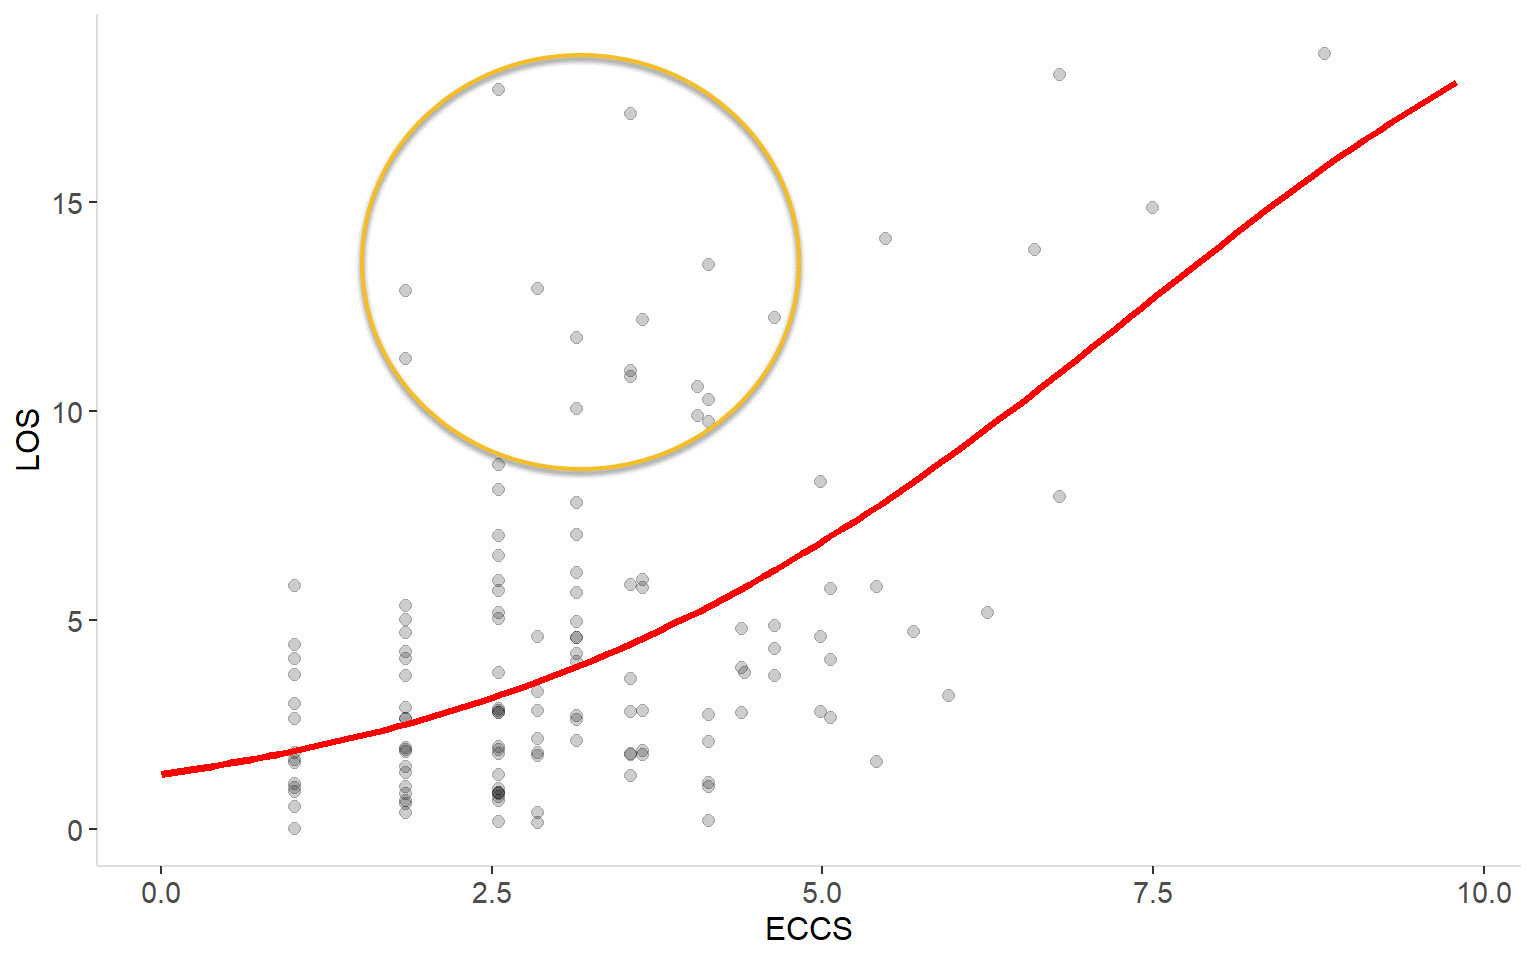 J64 – Cellulitis episodes with expected ELOS v2.0 shown in red. A group of unexplained outliers has been circled.